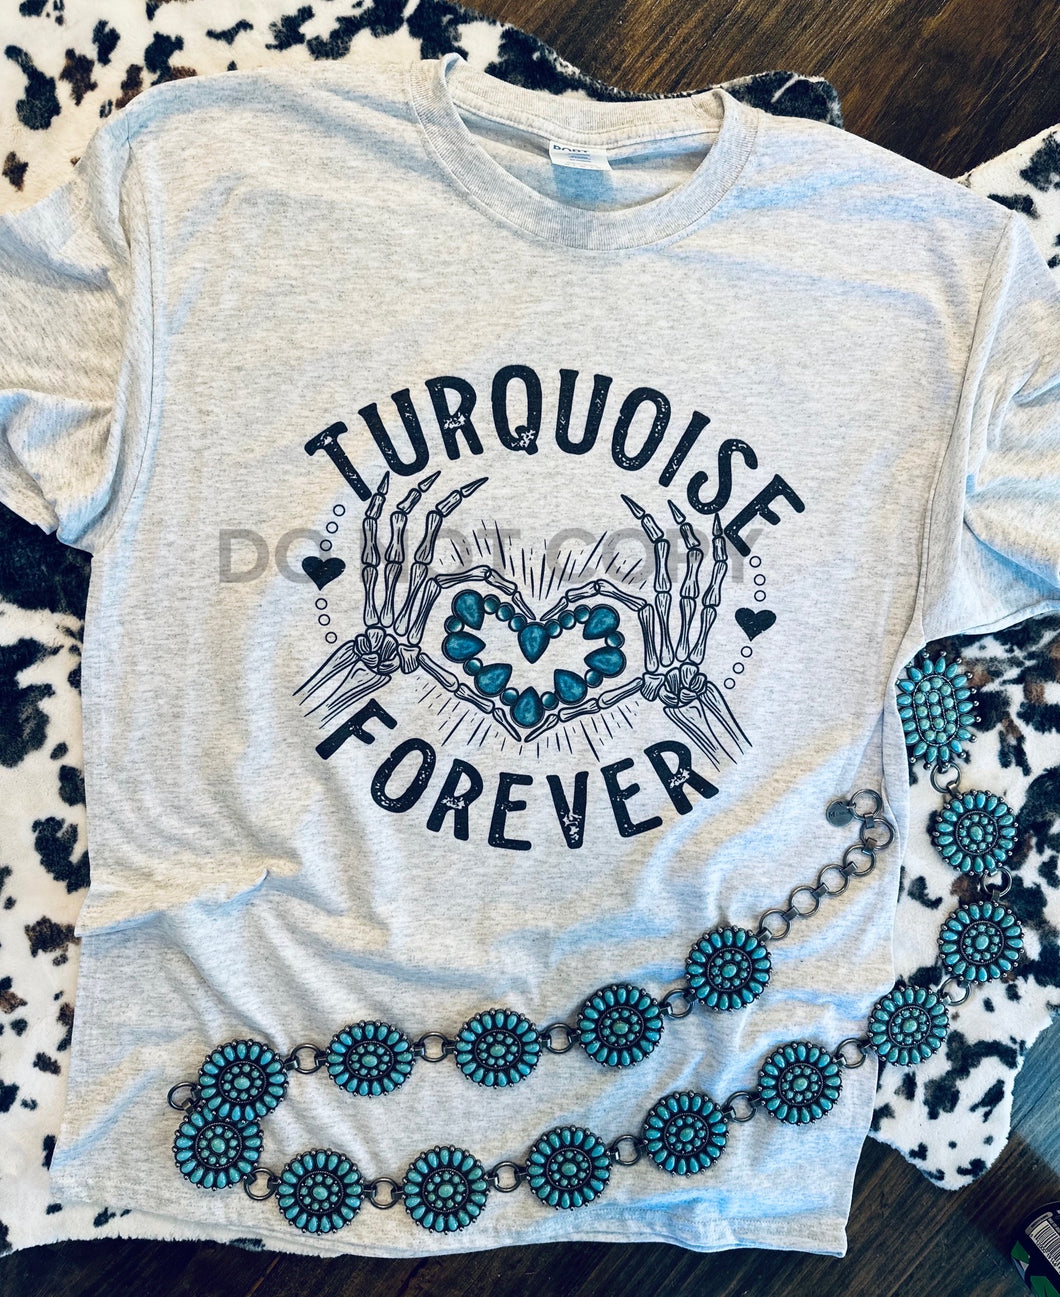 Turquoise forever skelli graphic tee - Mavictoria Designs Hot Press Express